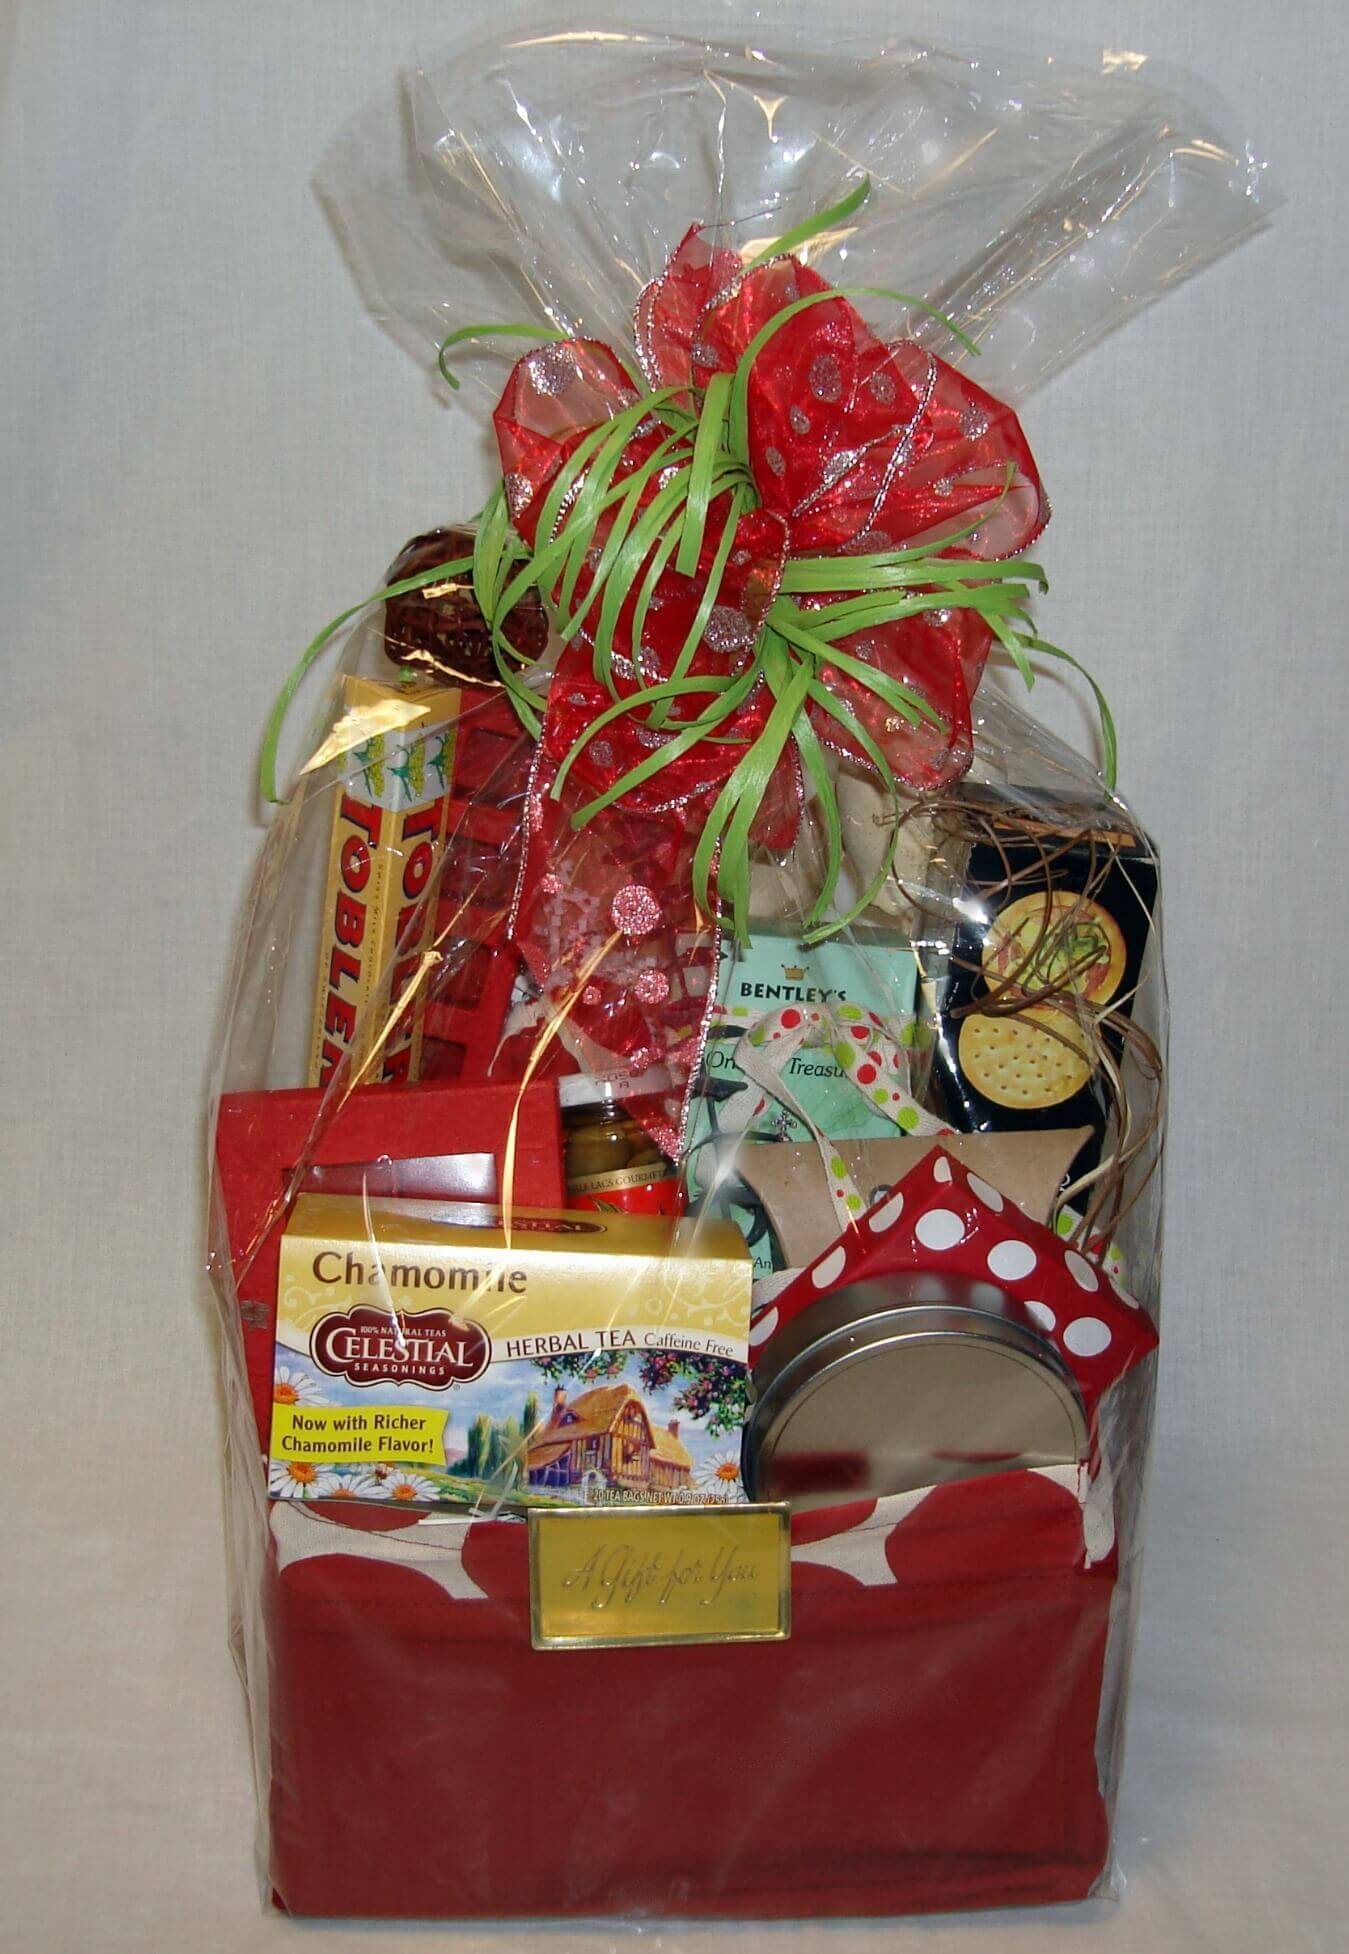 Shirley Frazier Builds Her Business One Gift Basket